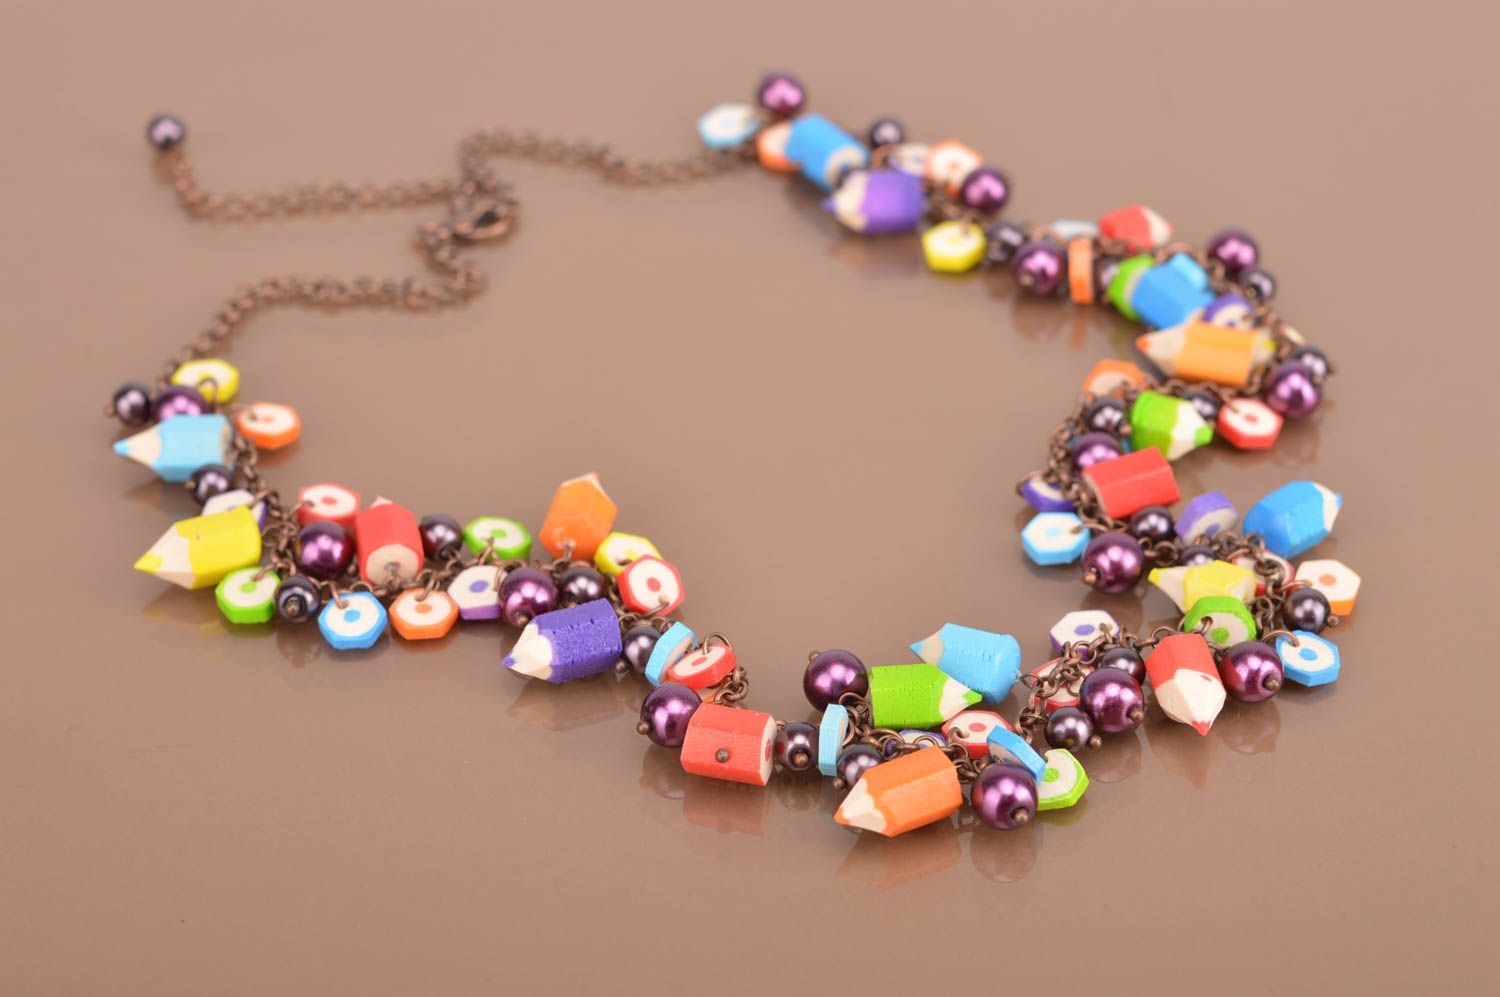 Unusual handmade polymer clay necklace funny plastic necklace jewelry designs photo 2